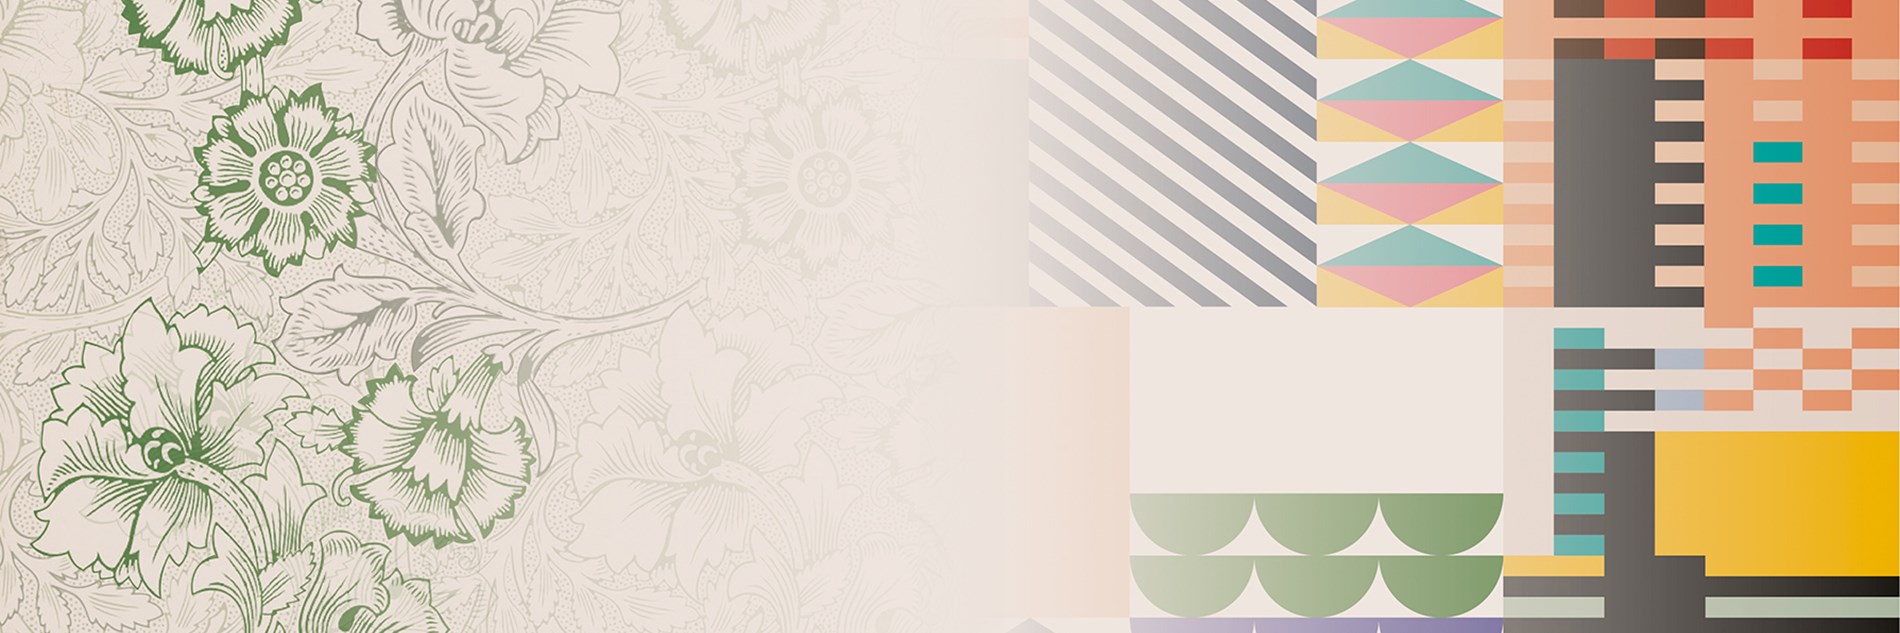 A digital collage on a cream coloured background. On the left is a flower pattern in green and grey lines. On the right is a composition of multicoloured geometric shapes.